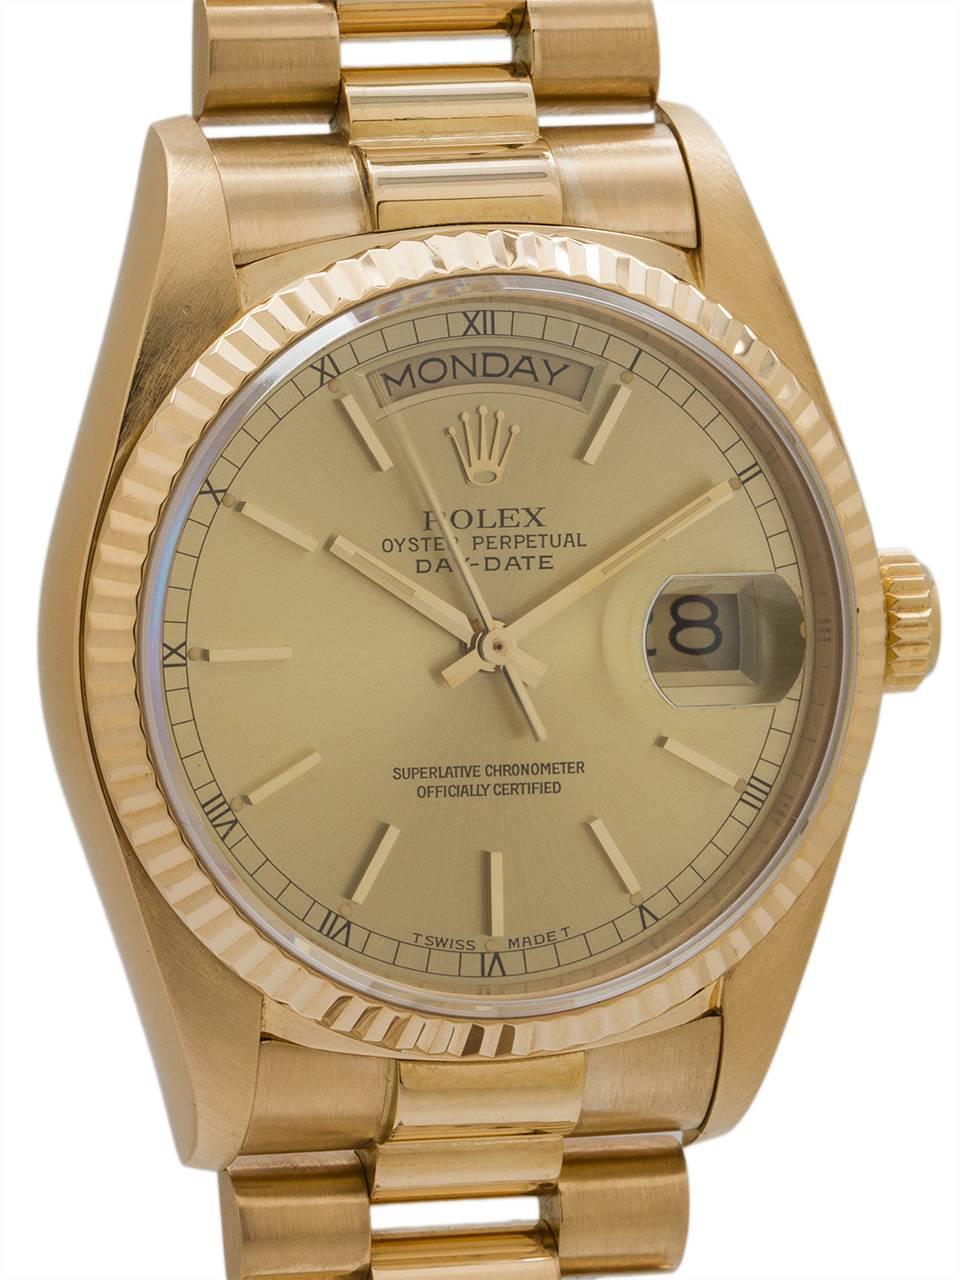 
Rolex 18K YG Day Date President ref# 18038 case serial# 7.4 million circa 1982. Featuring 36mm diameter full size man’s model with sapphire crystal and fluted bezel, with a beautiful original champagne Rolex dial with gold applied indexes and gilt